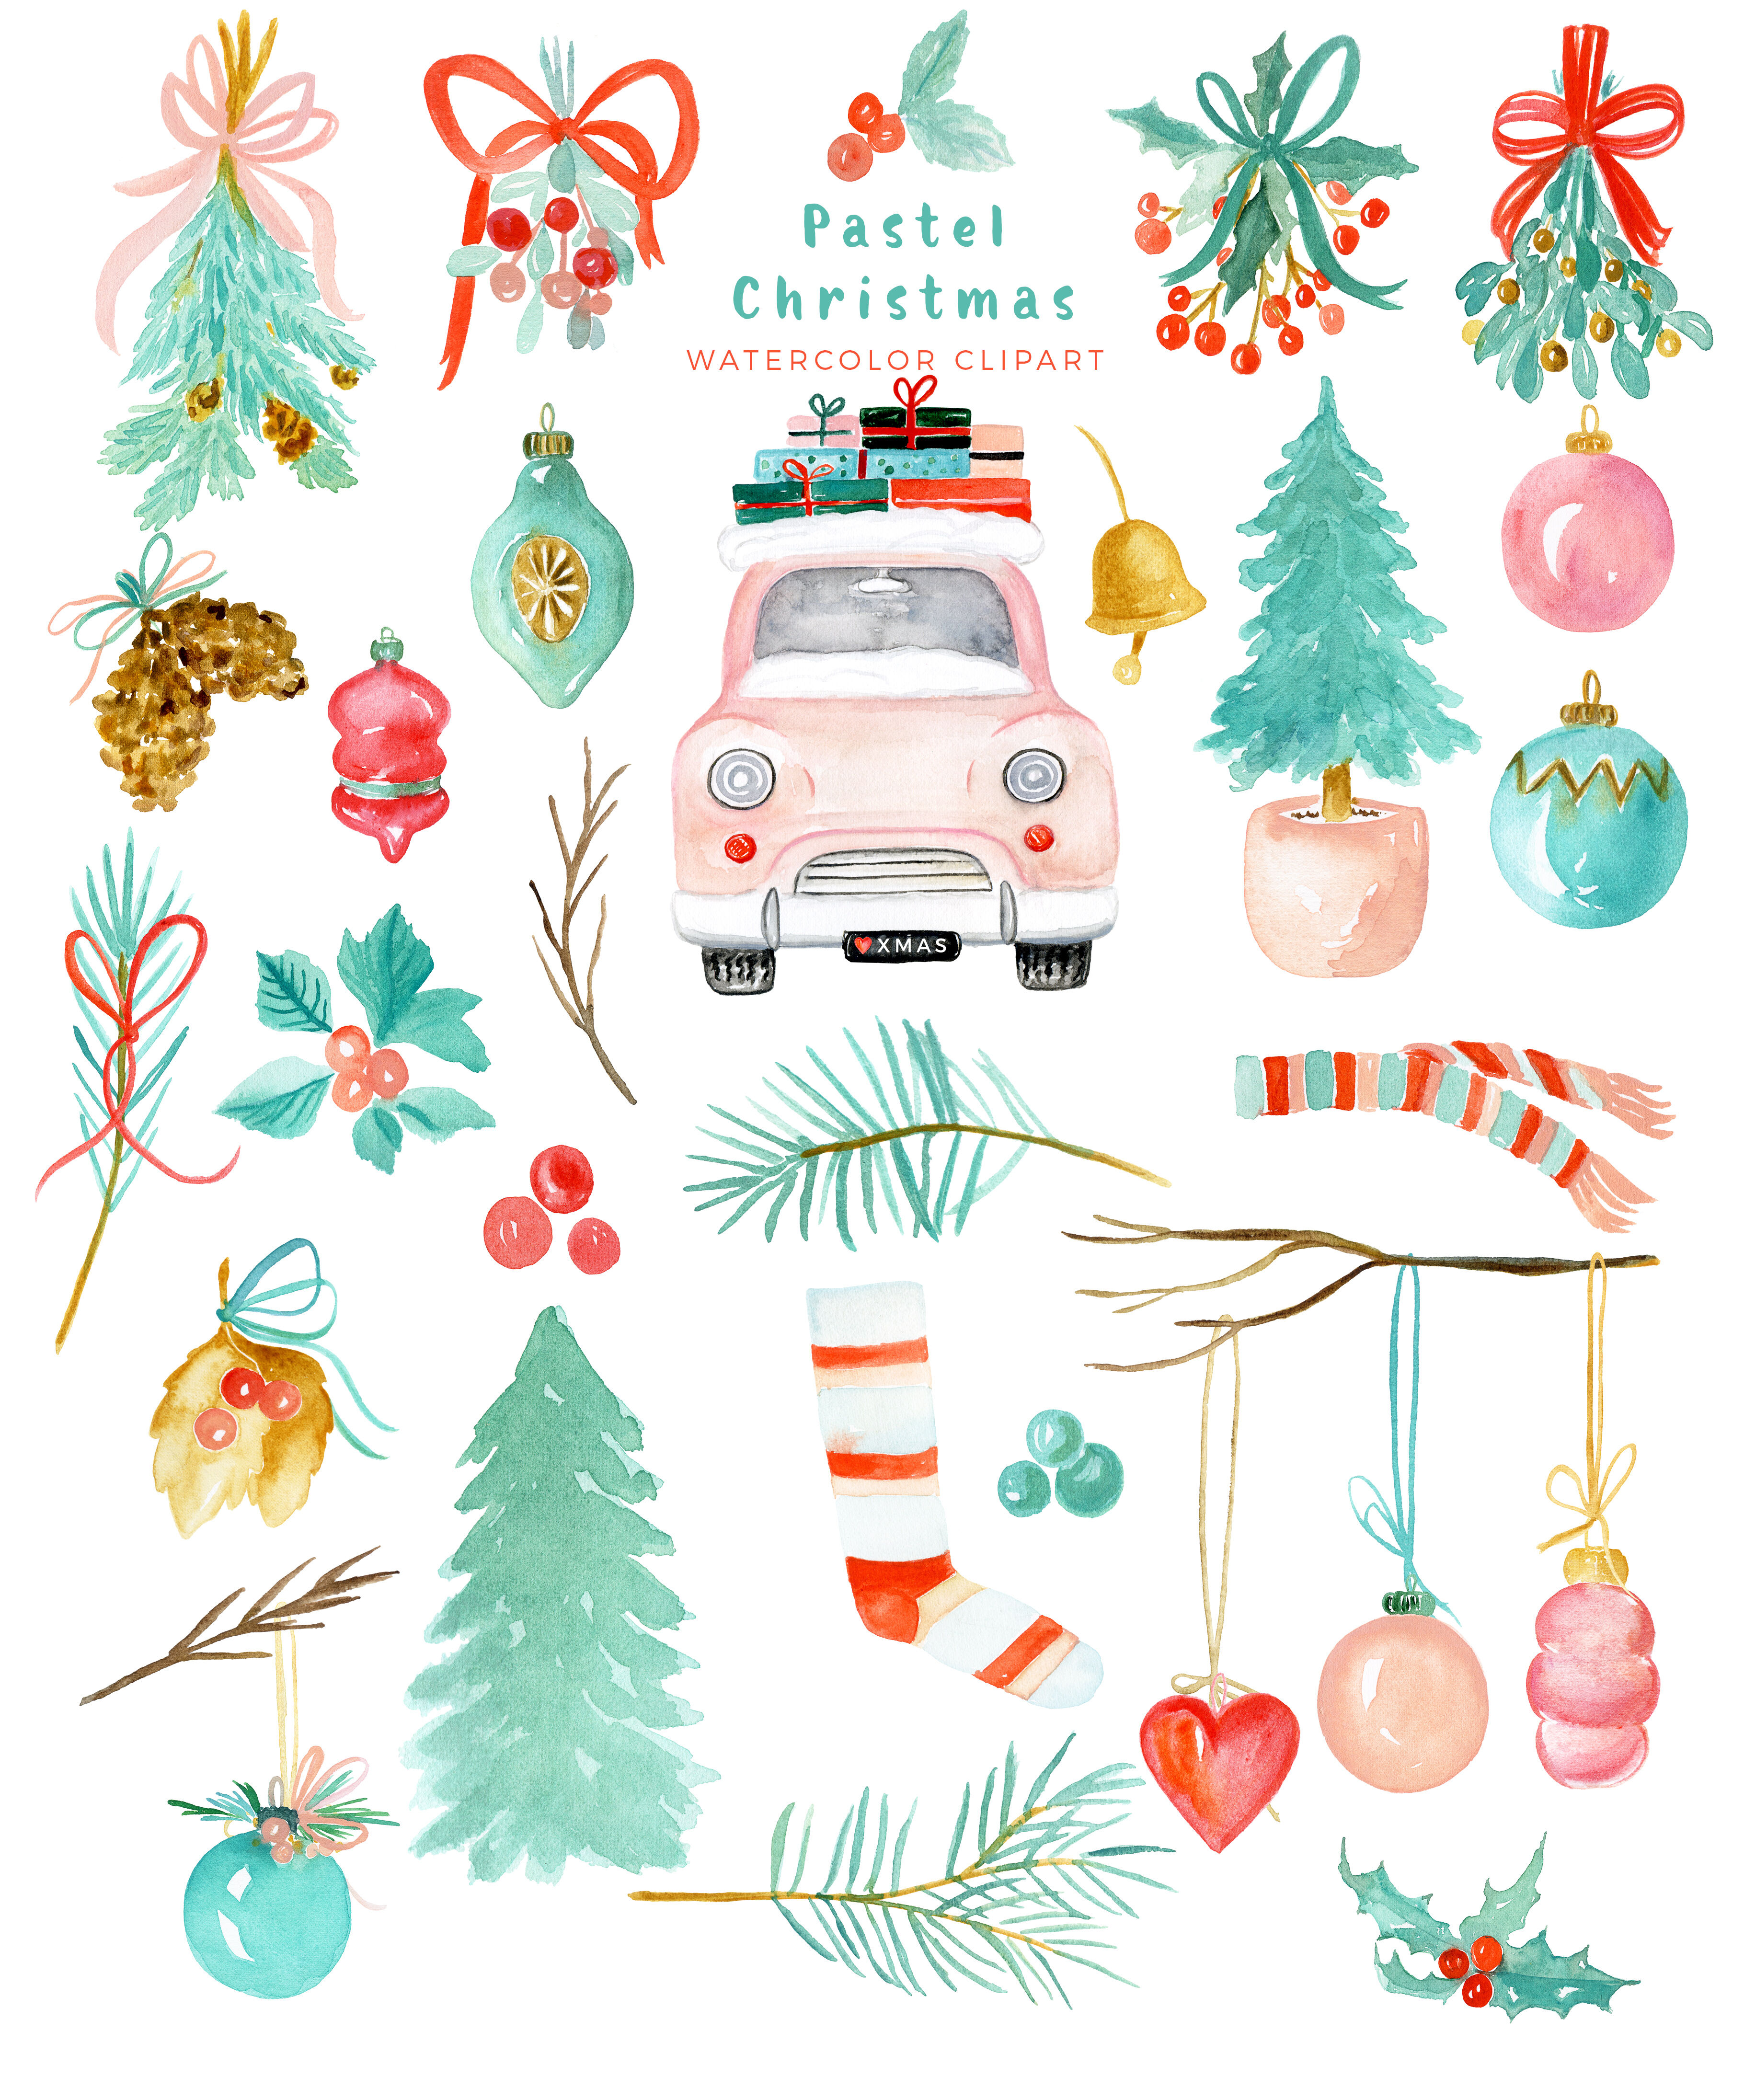 Pastel Christmas | Watercolor Holiday Clipart By Labfcreations | Thehungryjpeg.com